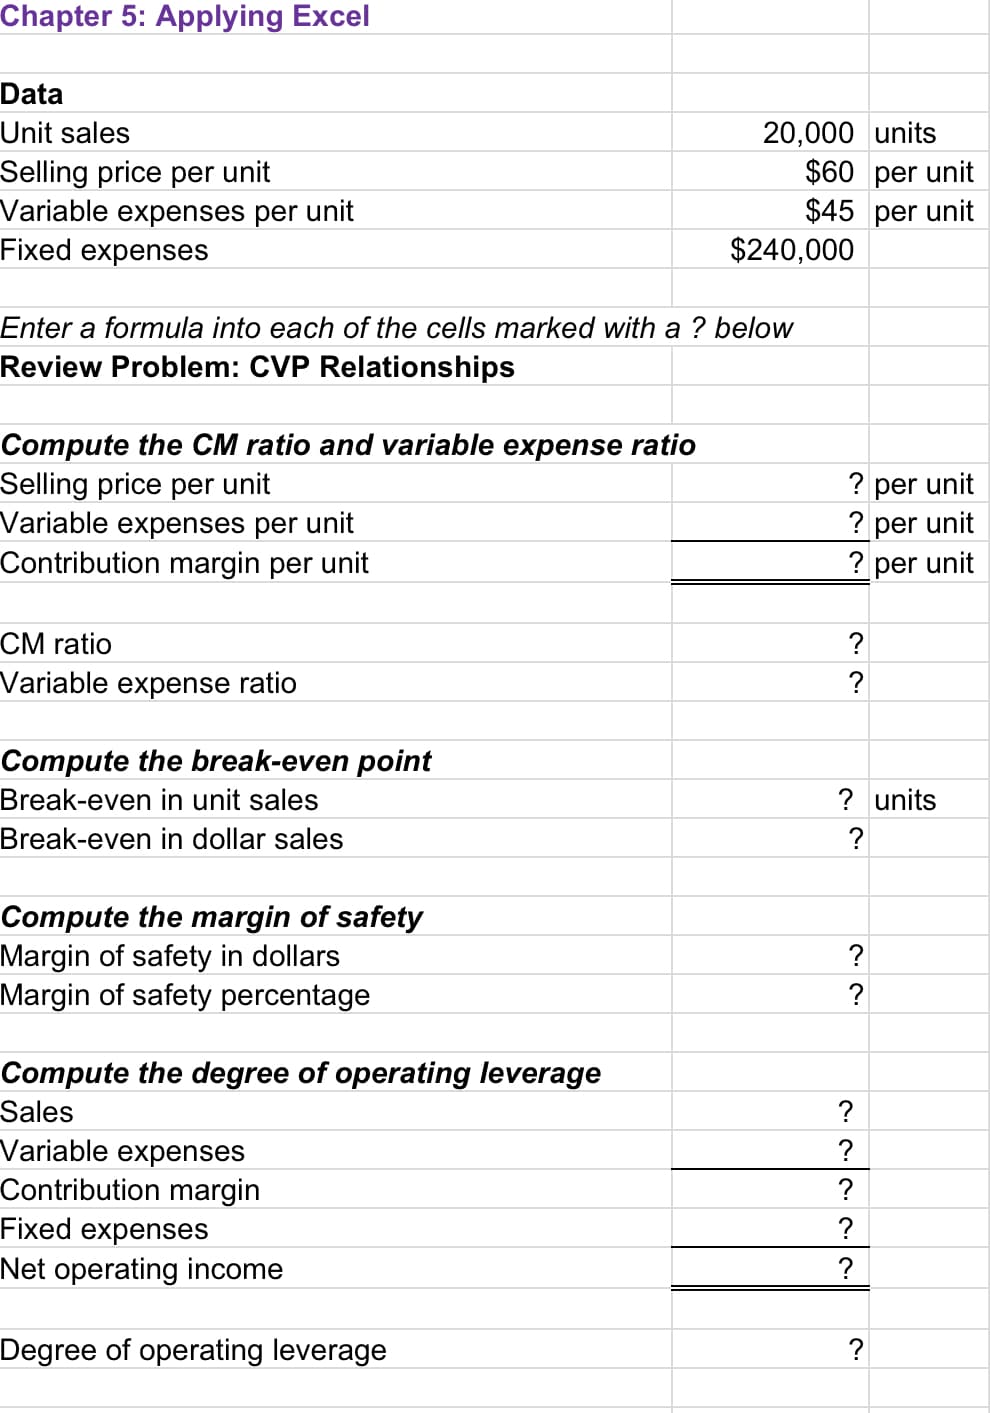 Chapter 5: Applying Excel
Data
Unit sales
Selling price per unit
Variable expenses per unit
Fixed expenses
Compute the CM ratio and variable expense ratio
Selling price per unit
Variable expenses per unit
Contribution margin per unit
Enter a formula into each of the cells marked with a ? below
Review Problem: CVP Relationships
CM ratio
Variable expense ratio
Compute the break-even point
Break-even in unit sales
Break-even in dollar sales
Compute the margin of safety
Margin of safety in dollars
Margin of safety percentage
Compute the degree of operating leverage
Sales
Variable expenses
Contribution margin
Fixed expenses
Net operating income
20,000 units
$60
$45 per unit
per unit
Degree of operating leverage
$240,000
? per unit
? per unit
? per unit
?
?
? units
?
?
?
?
?
?
?
?
?